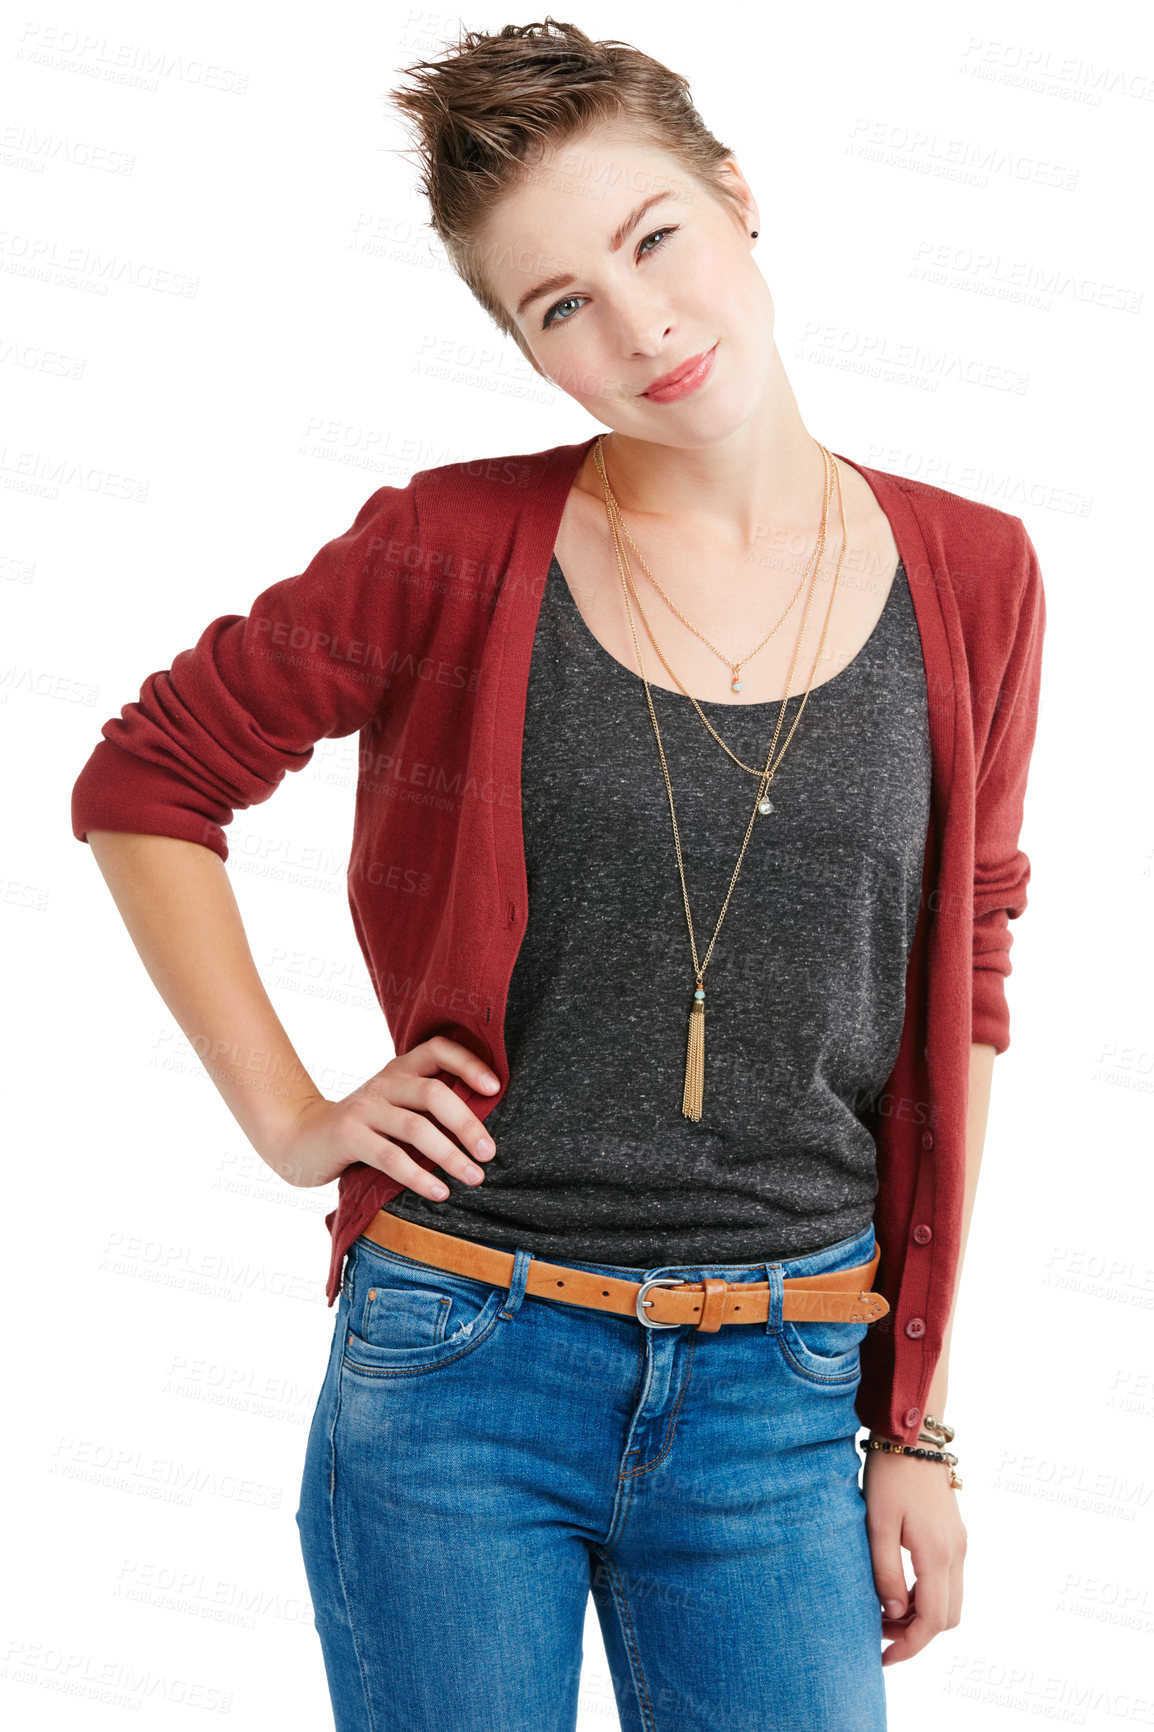 Buy stock photo Studio portrait of a young woman posing with attitude against a white background